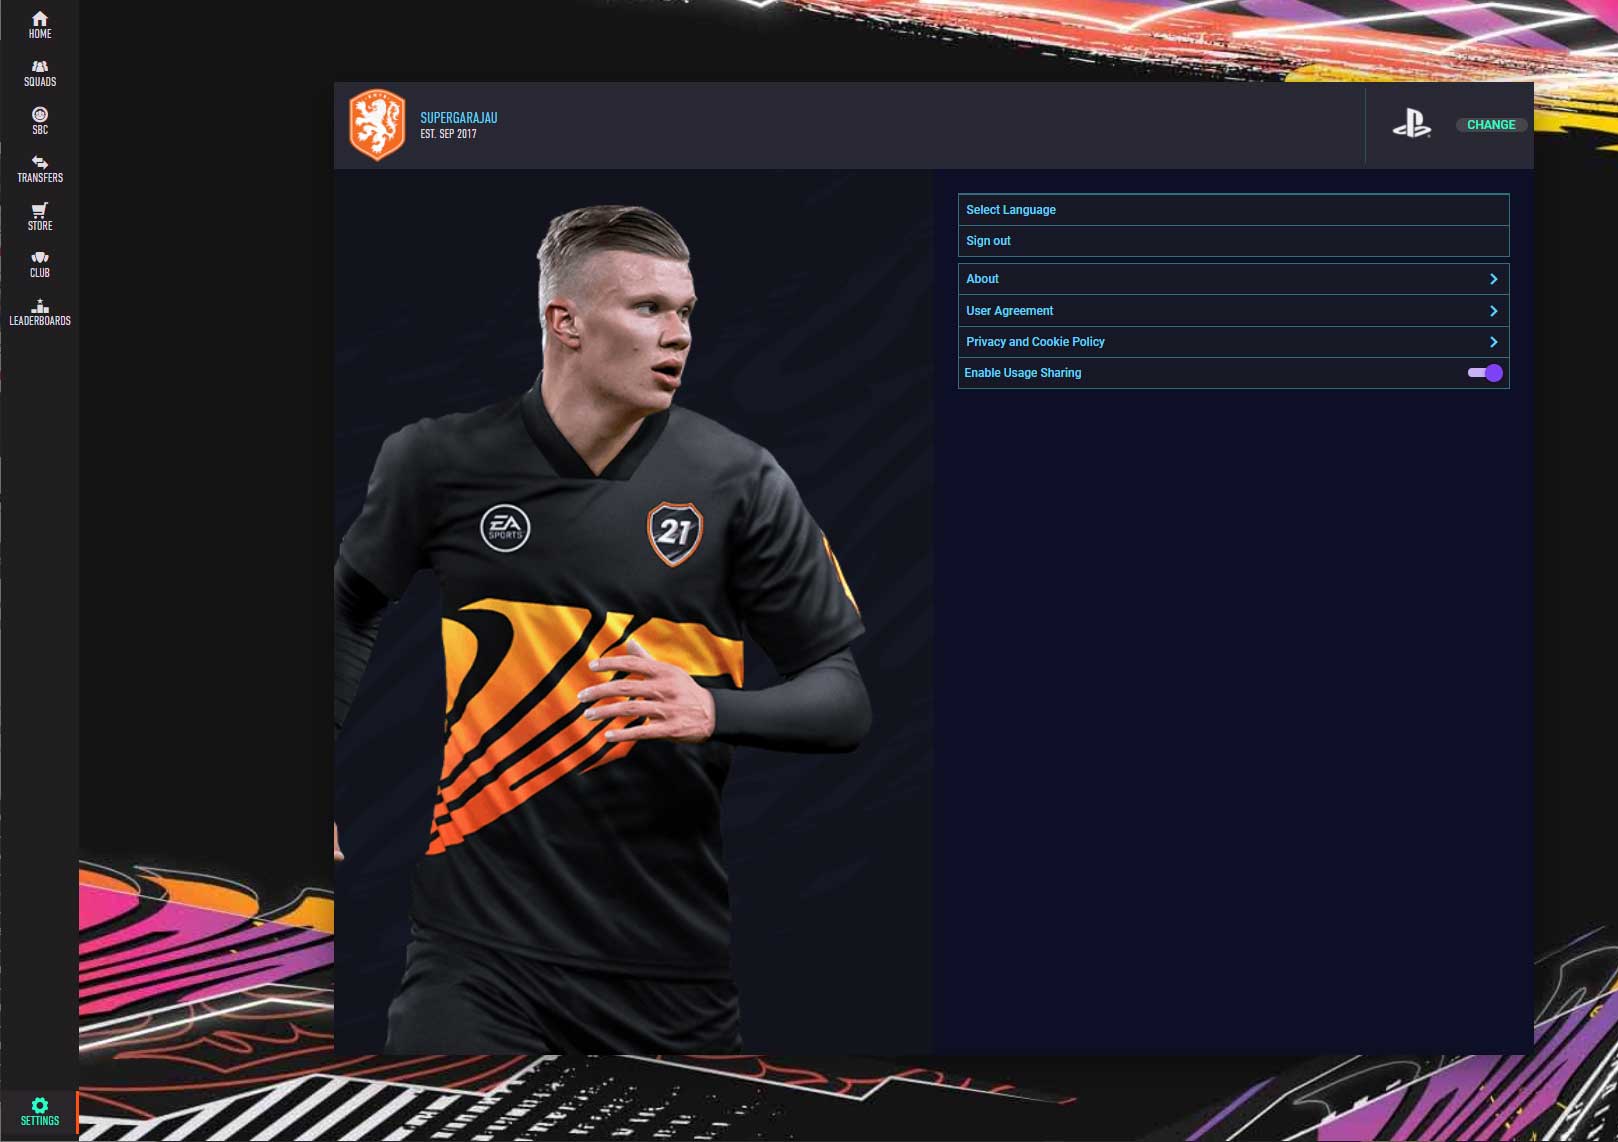 EA SPORTS FC on X: The #FUT Web App for #FIFA22 is live 🙌💯 Updates to  the Companion Apps coming soon 💪    / X